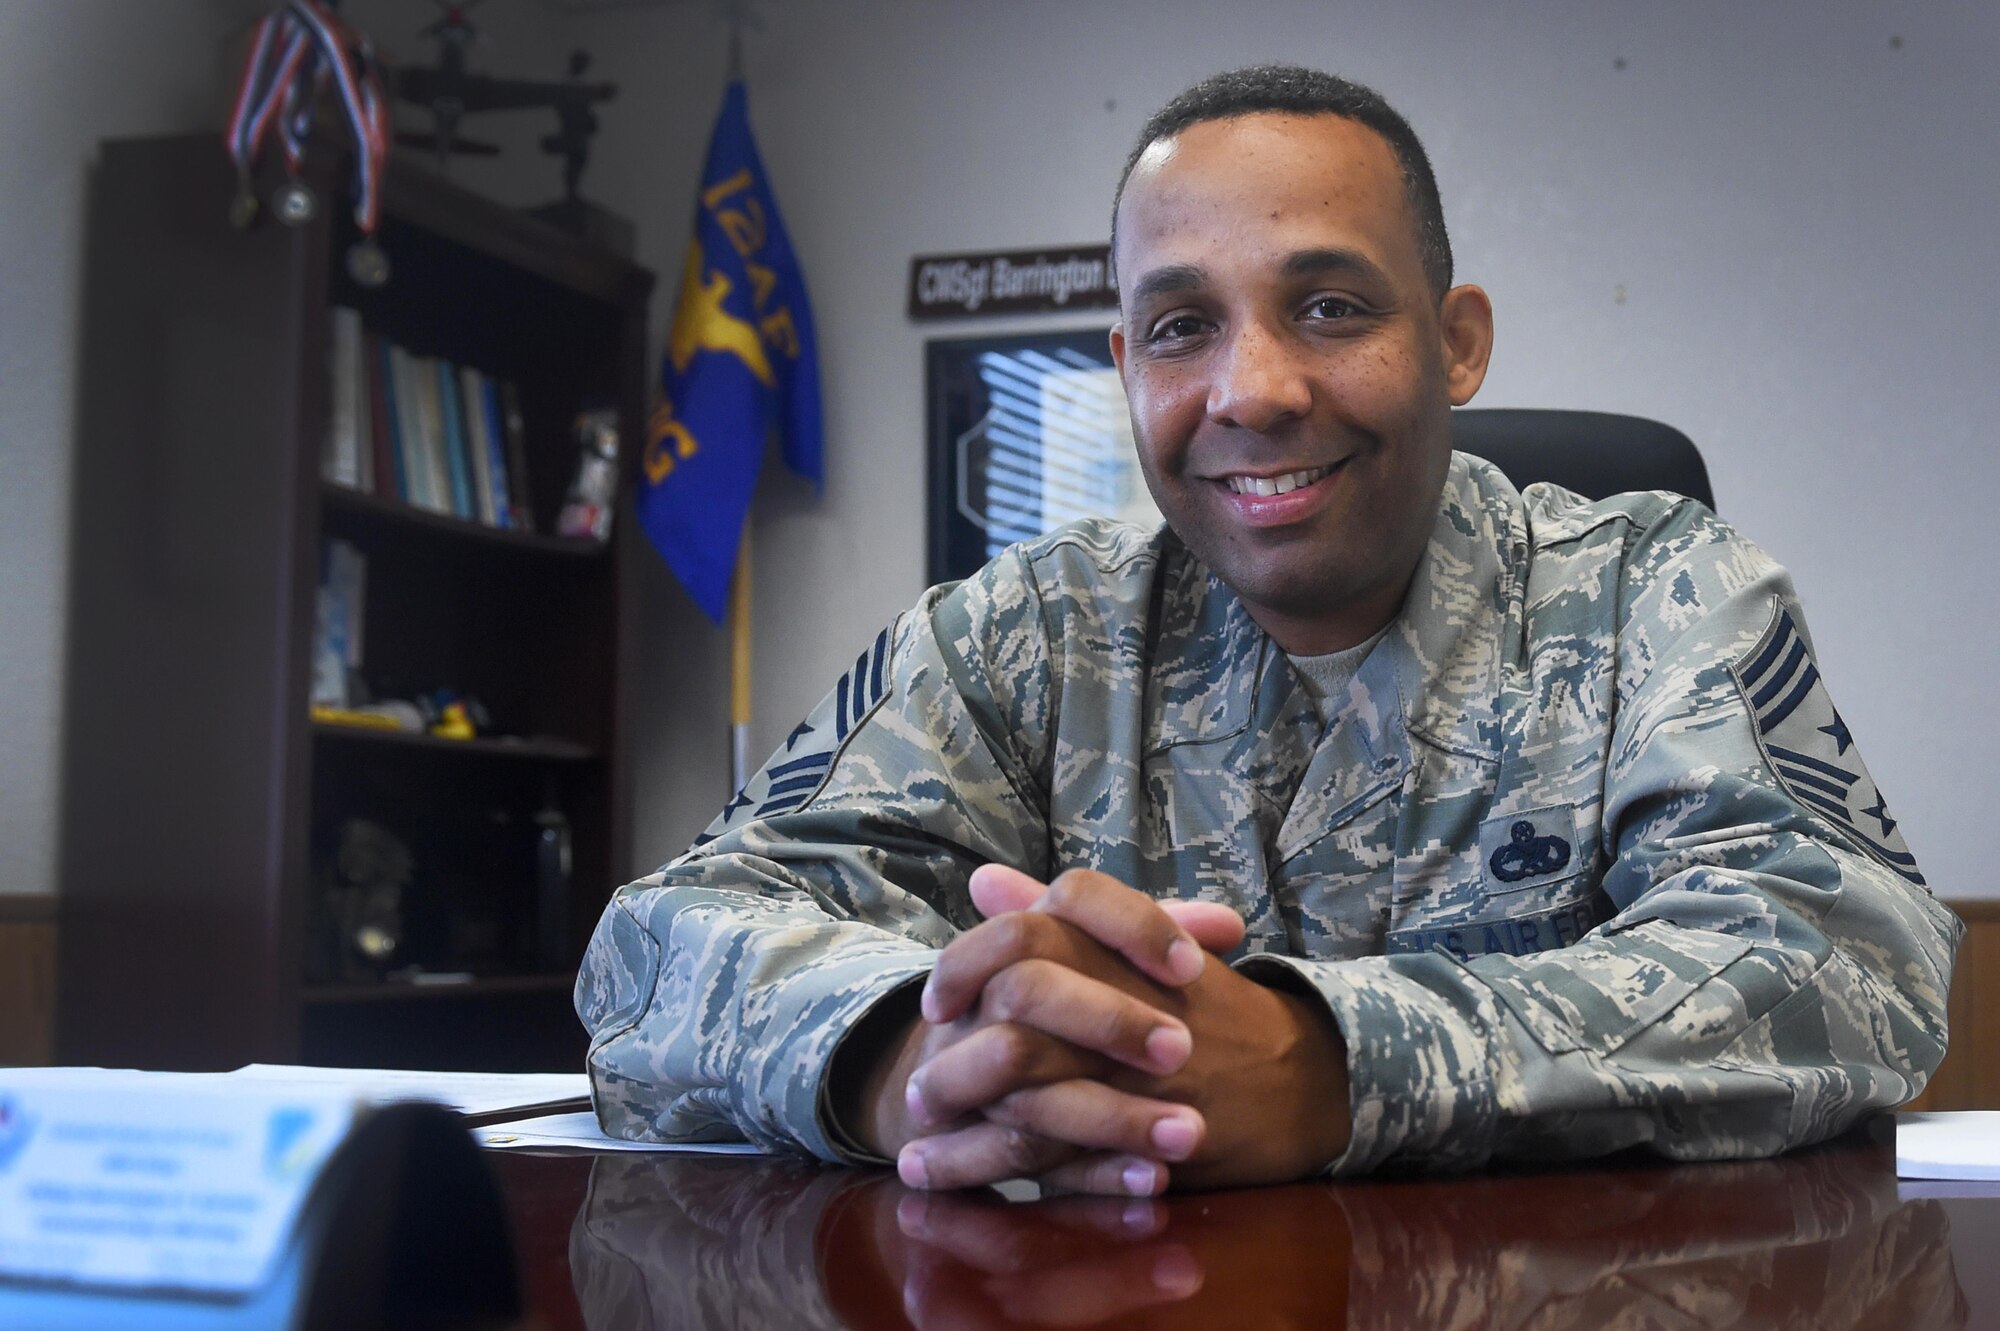 Chief Master Sgt. Barrington Bartlett, the 49th Wing command chief, poses for a portrait in his office at Holloman Air Force Base, N.M., on June 27. Bartlett, who formerly served as the 56th Maintenance Group superintendent at Luke Air Force Base, Ariz., is Holloman’s newest command chief. (U.S. Air Force photo by Staff Sgt. Eboni Prince)